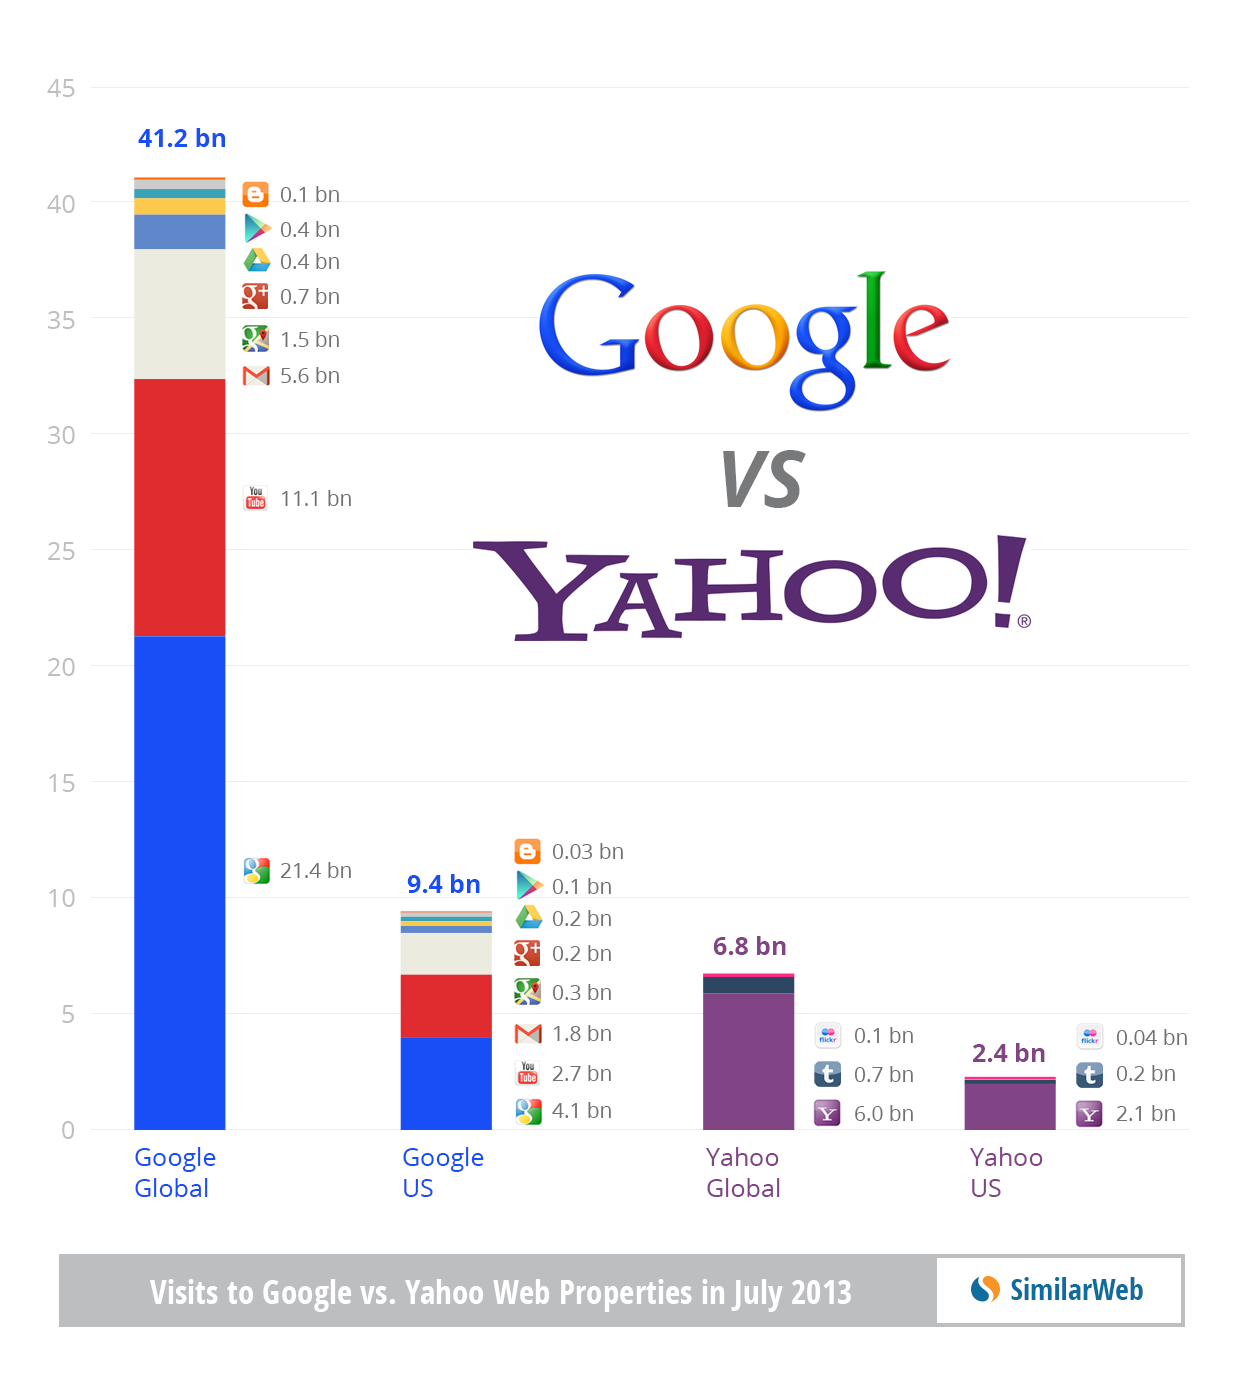 Comparison of Google and Yahoo's web traffic using hits, rather than unique visitors. Credit: SimilarWeb